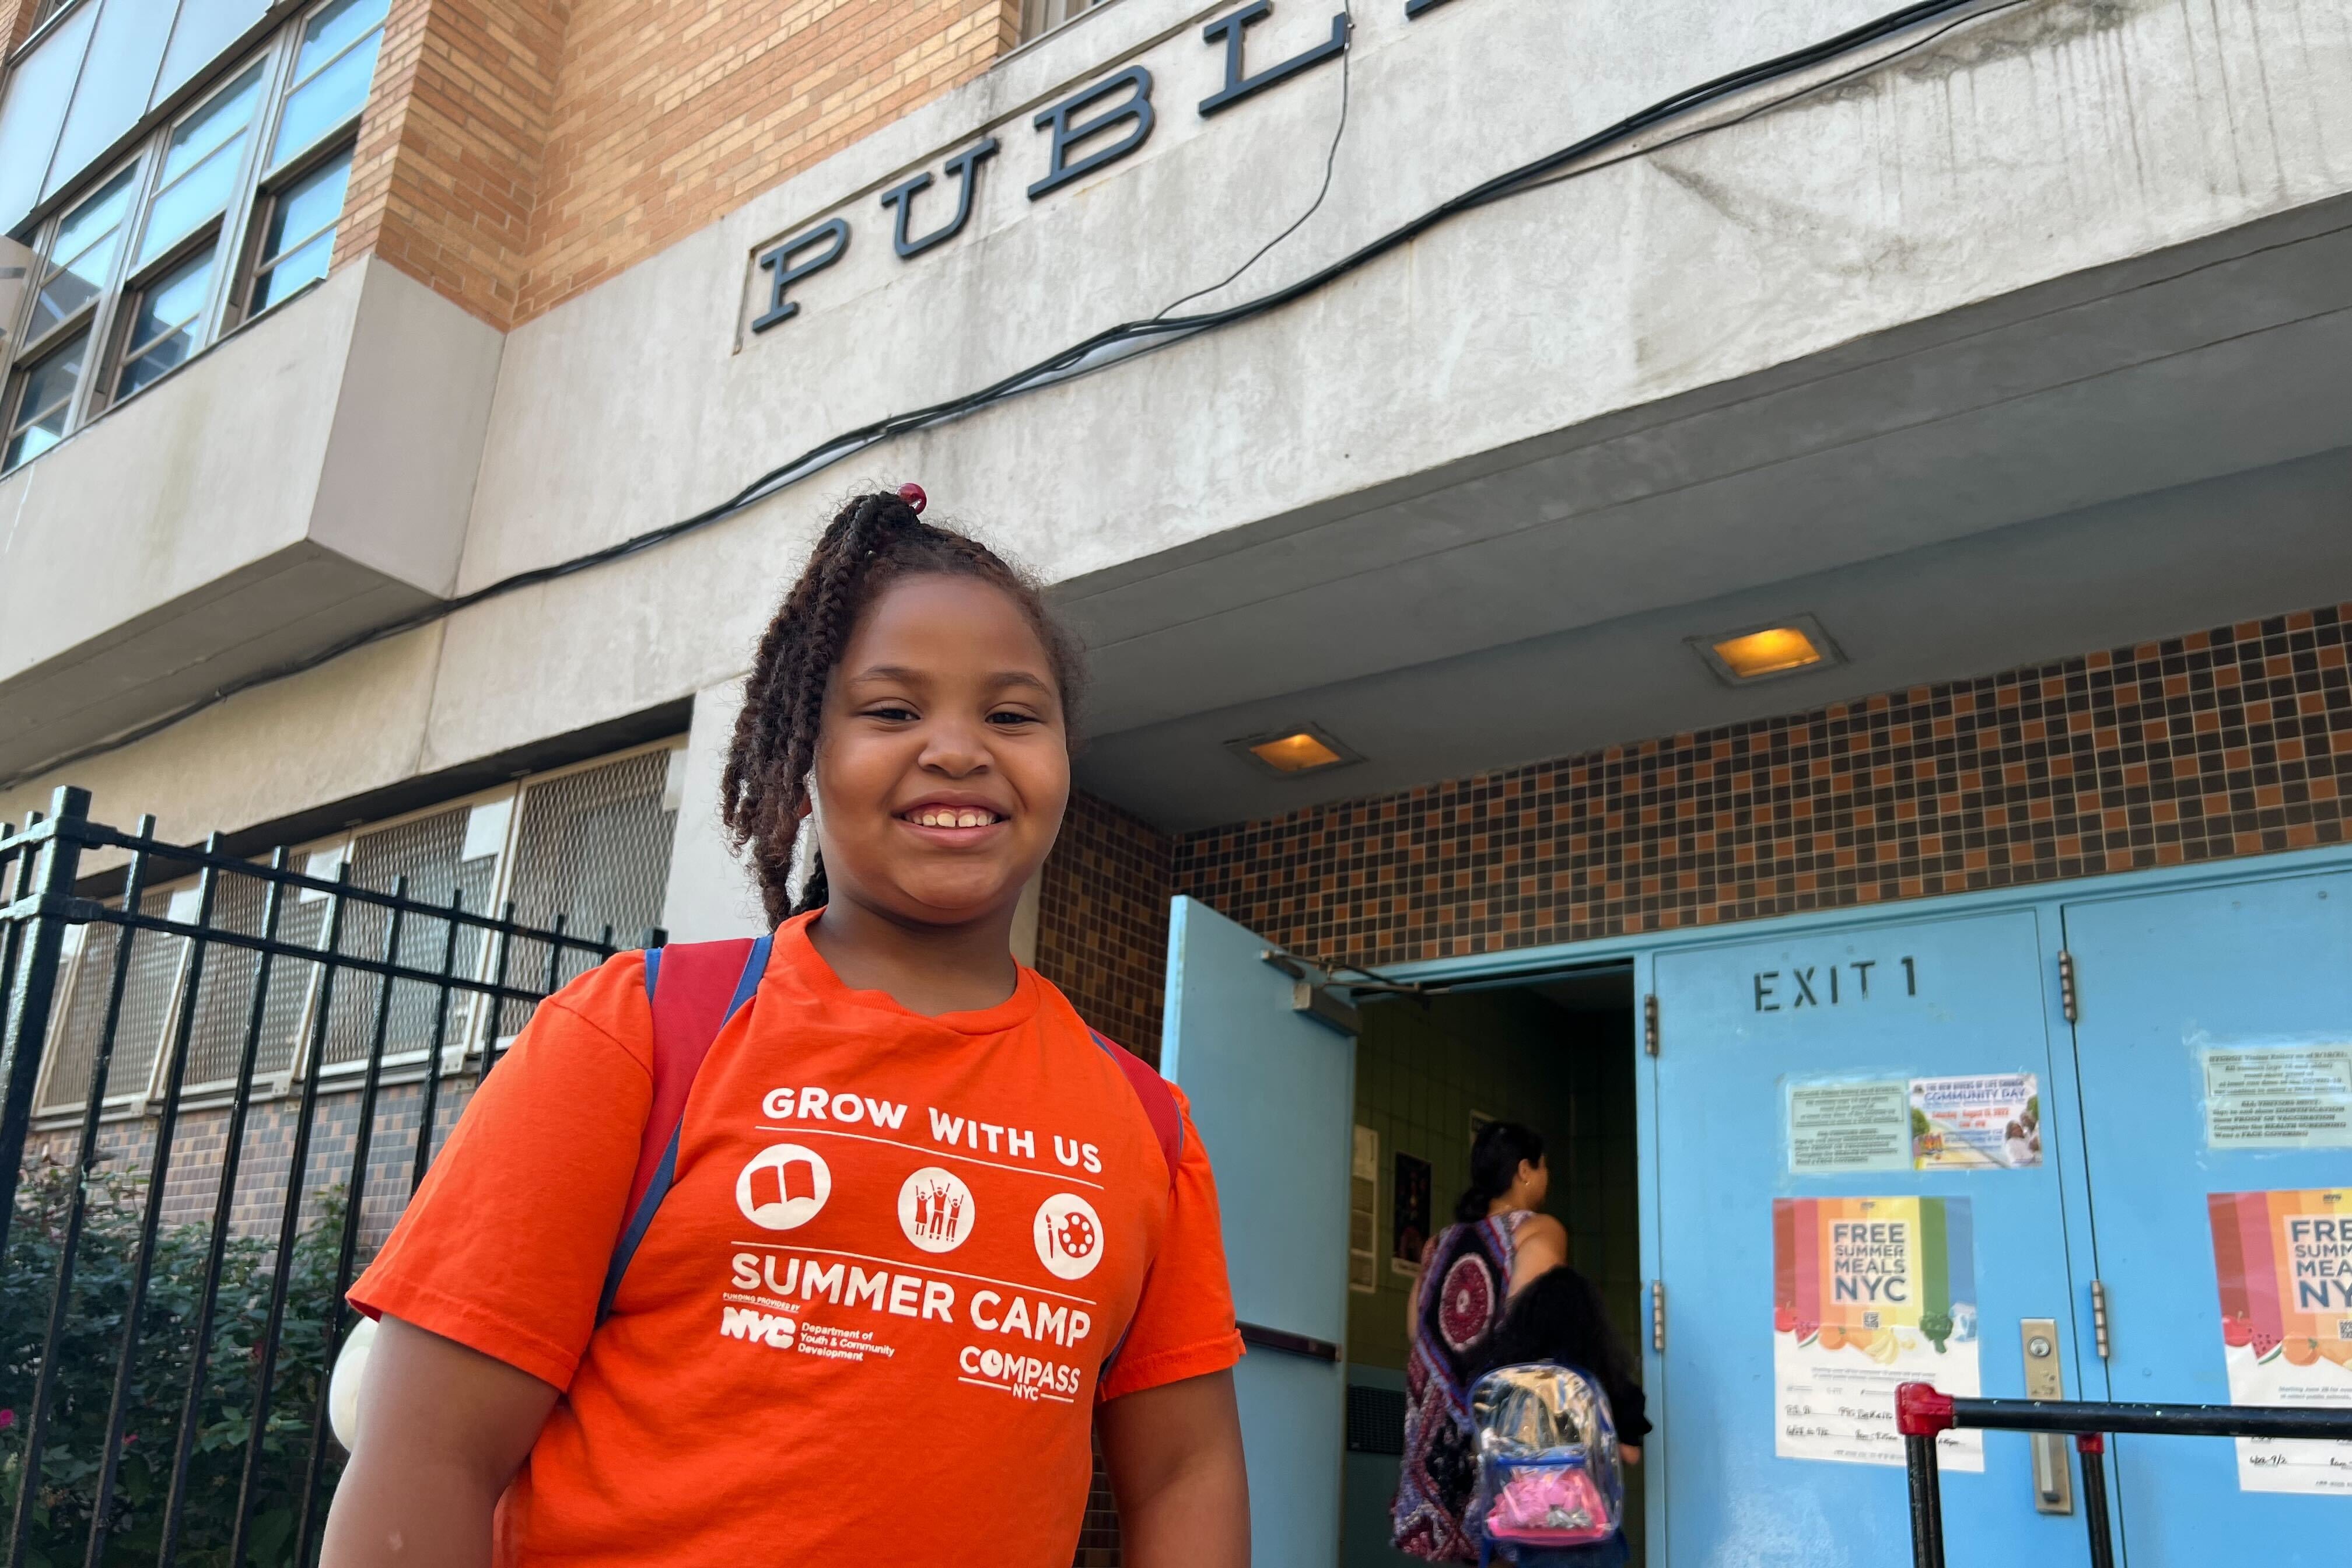 A young girl in a bright orange T-shirt stands in front of her blue school doors.